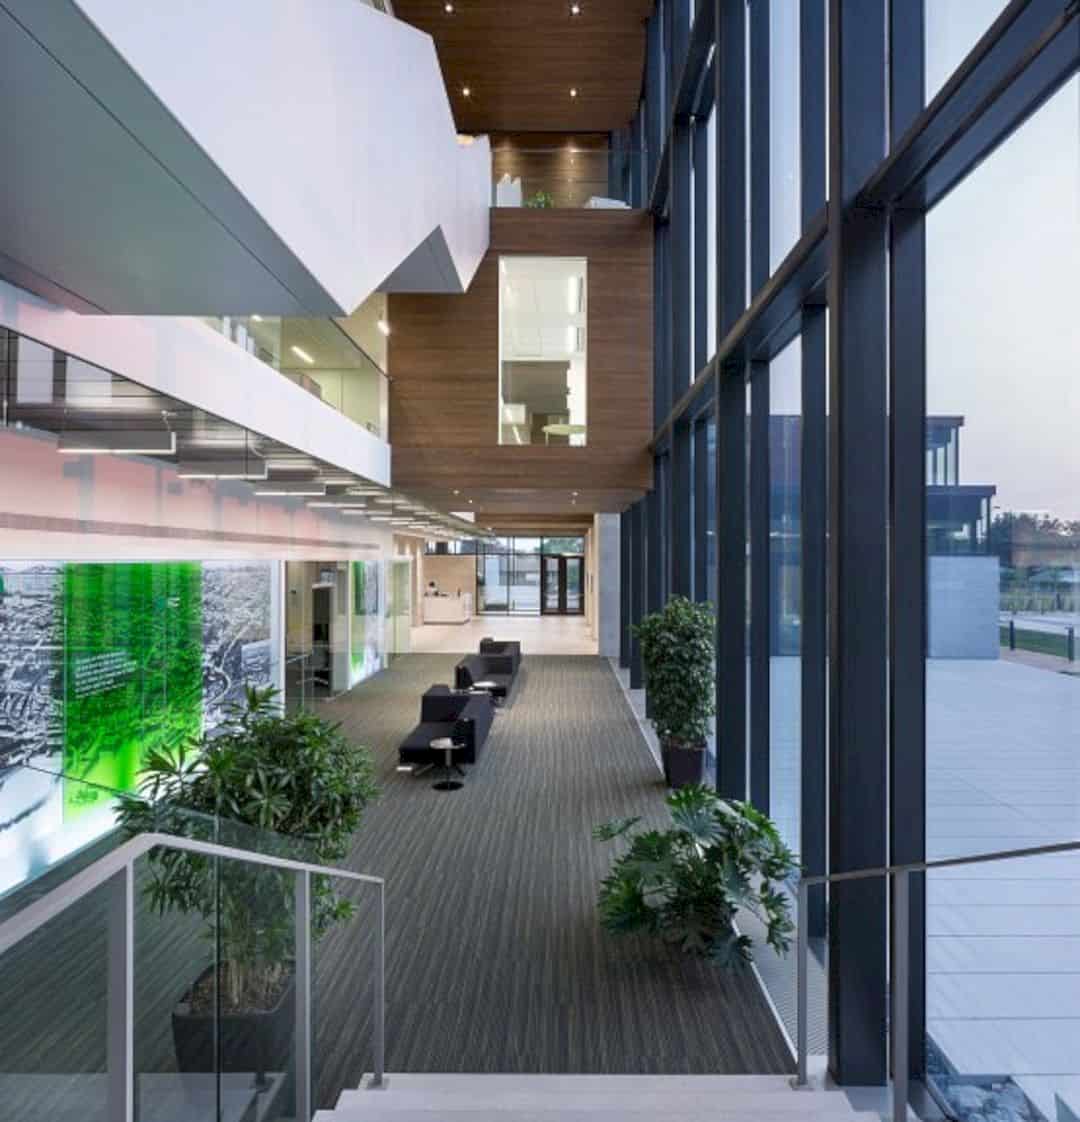 Desjardins Group Headquarters An Architectural Approach Combining Historical Value And Modernism Of Desjardins 4